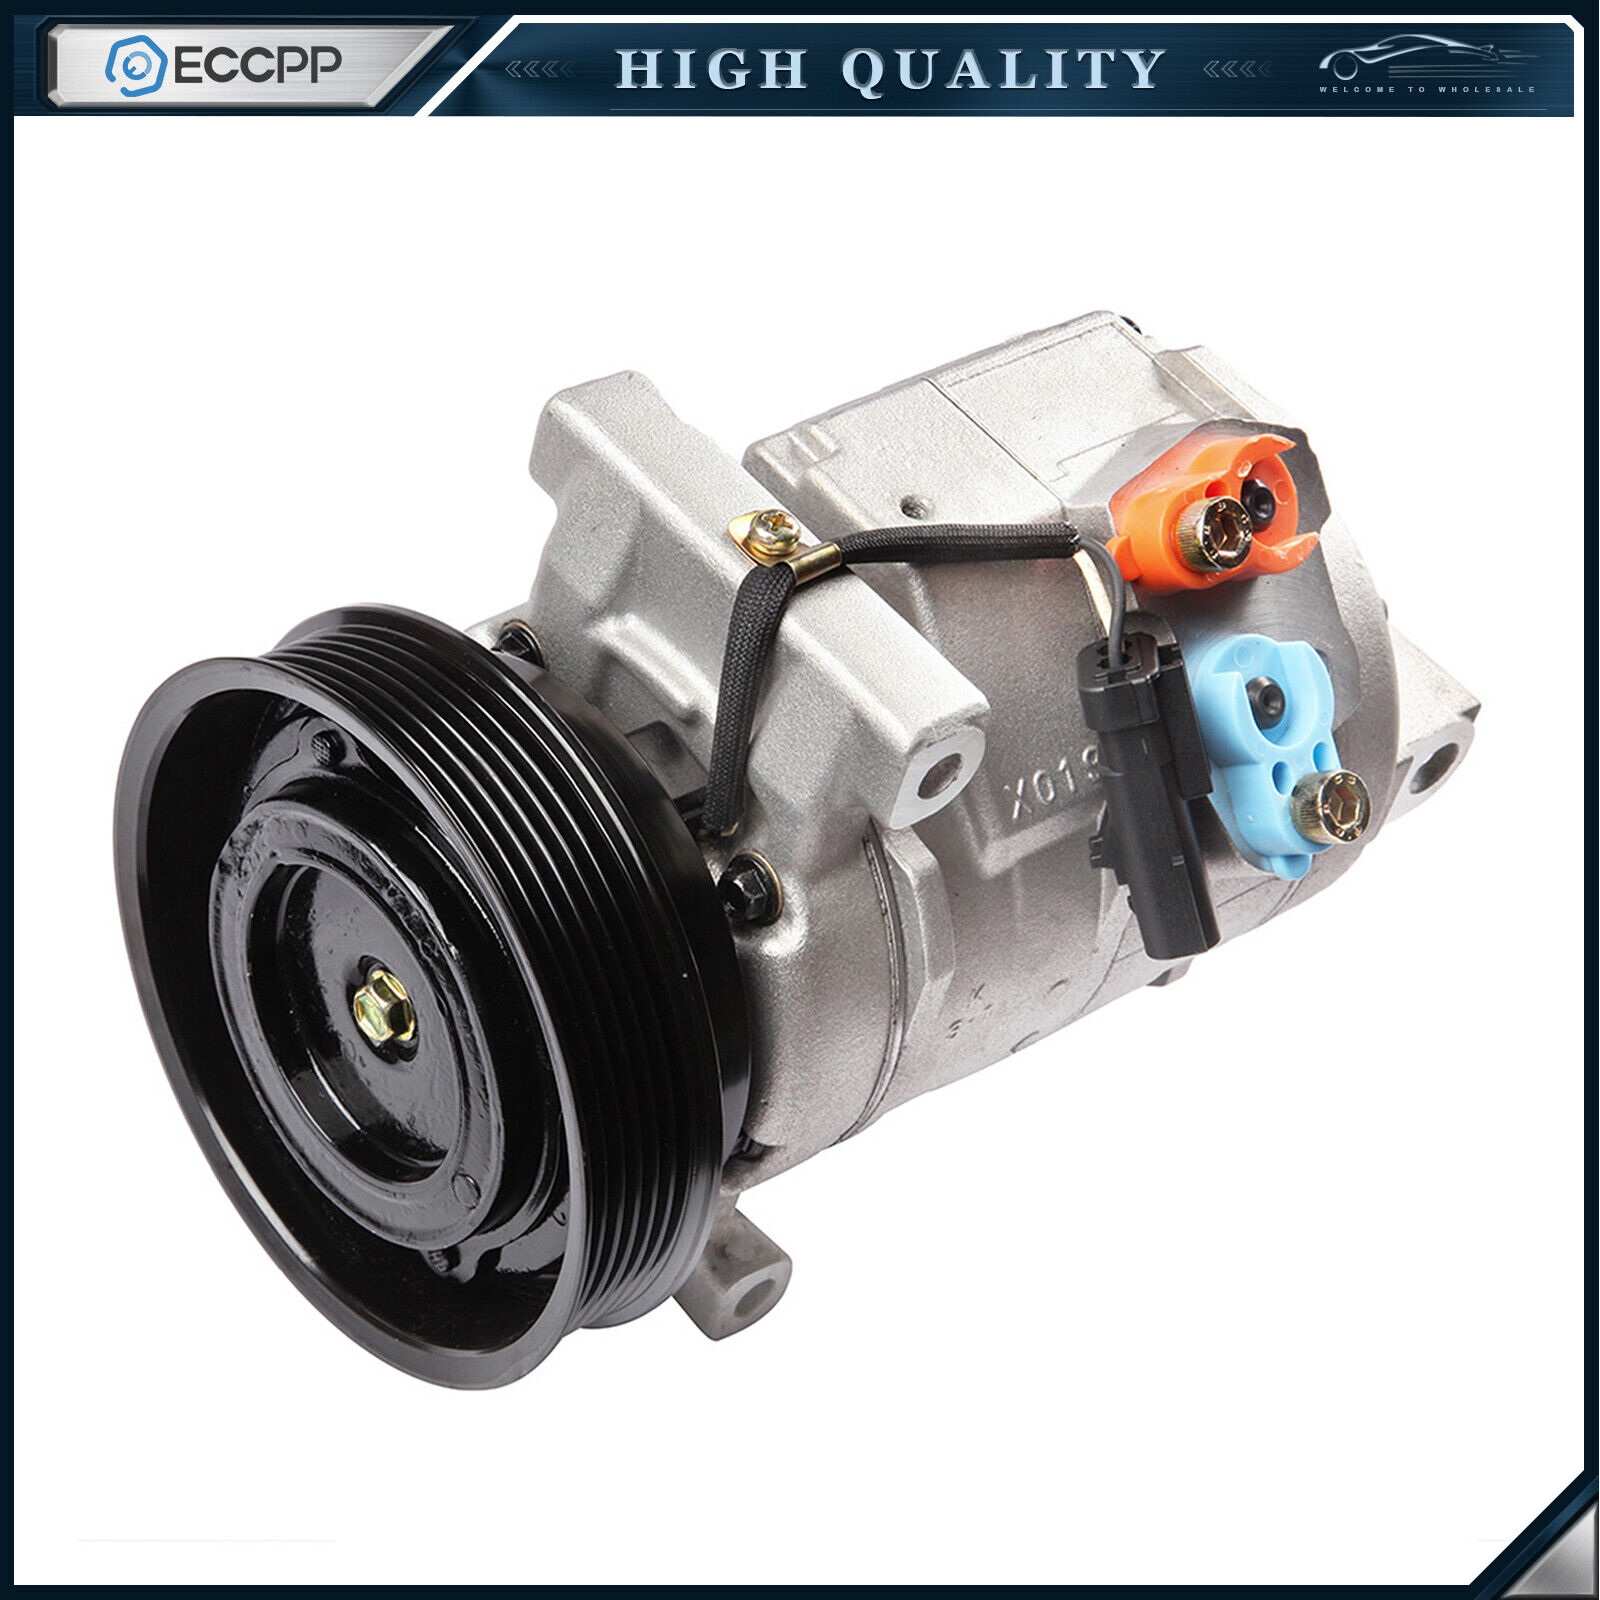 ECCPP A/C AC Compressor W/Clutch For Chrysler 300 For Dodge Charger Magnum 3.5L